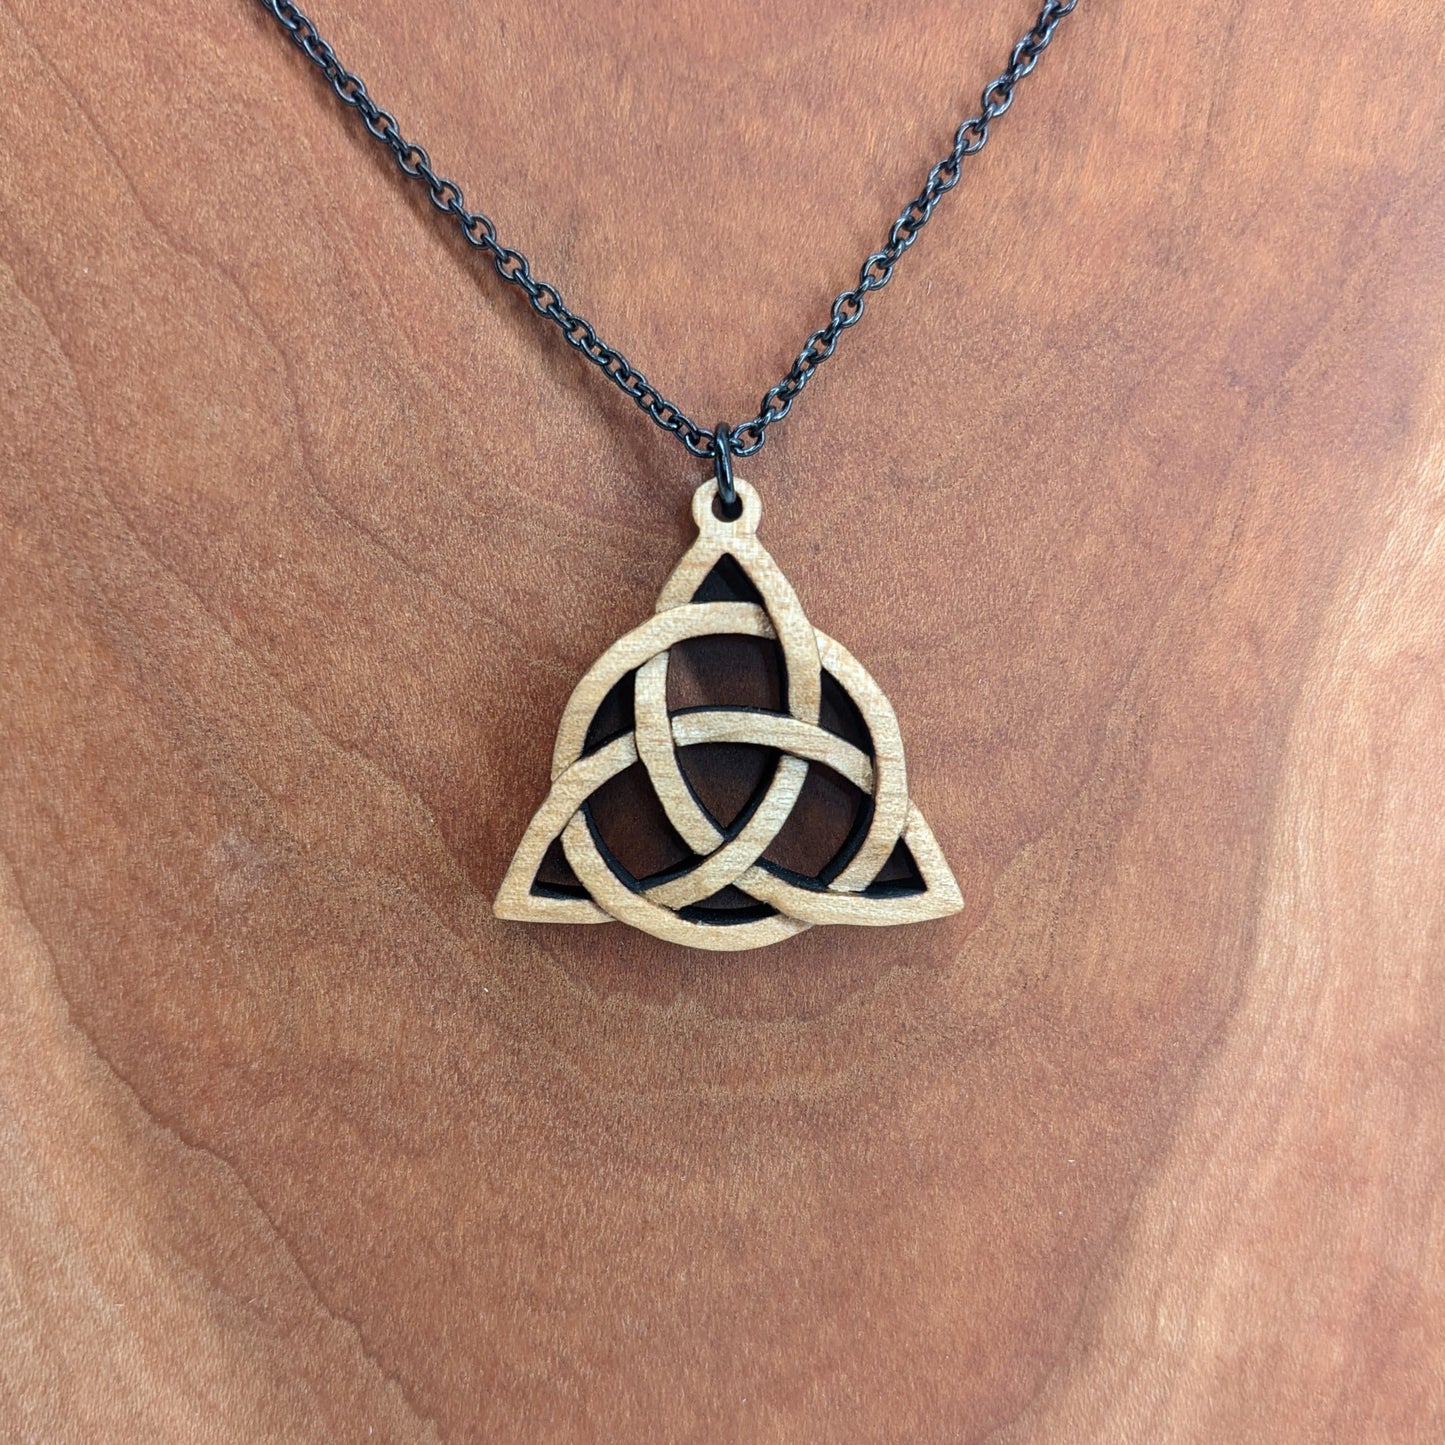 Wooden necklace pendant created in the style of a Celtic woven trinity symbol. Made from hard maple.  Hanging from a black stainless steel chain against a cherry wood background.